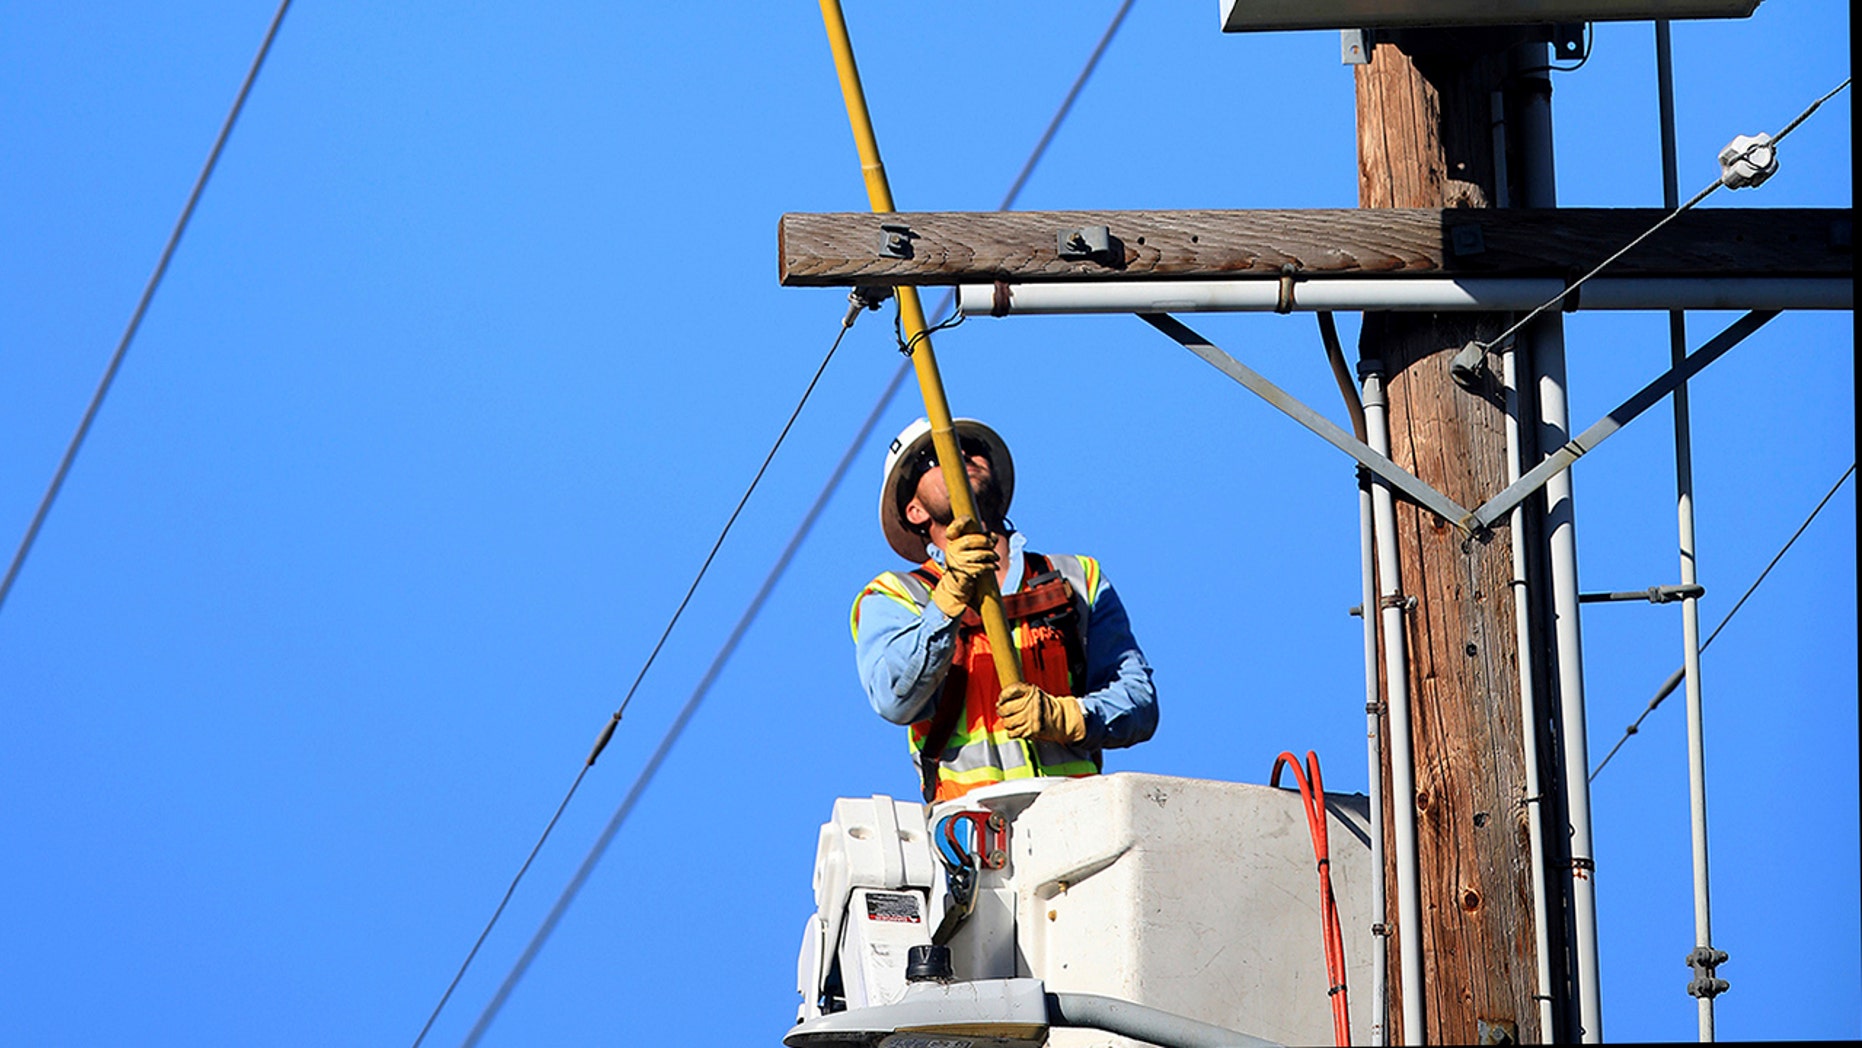 A Pacific Gas & Electric Co. crew trips a segment of power lines in Santa Rosa, Calif., Wednesday, Oct. 23, 2019, that will make it easier to restore power. The power was shut off by PG&E due to the high fire danger. (Kent Porter/The Press Democrat via AP)